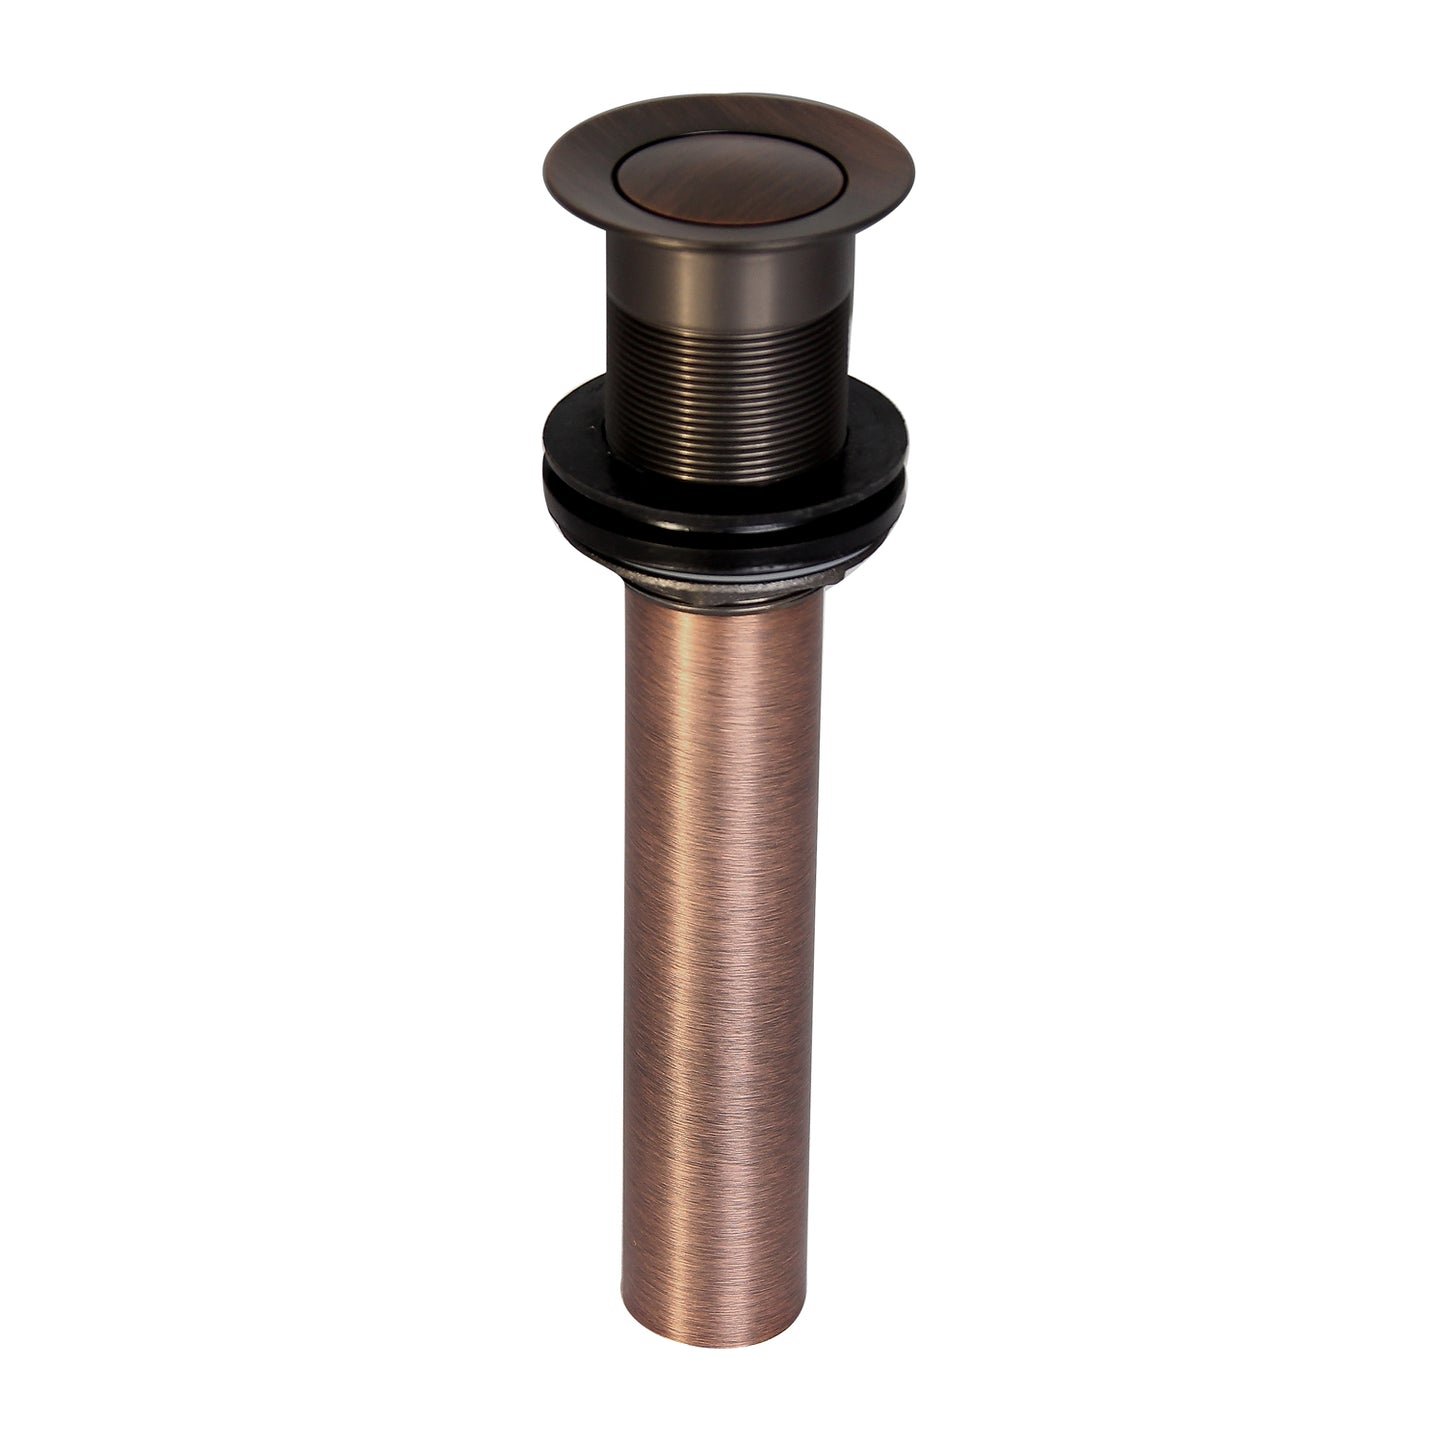 Pop-Up 2-1/8" Bathroom Sink Drain no Overflow Hole in Oil Rubbed Bronze